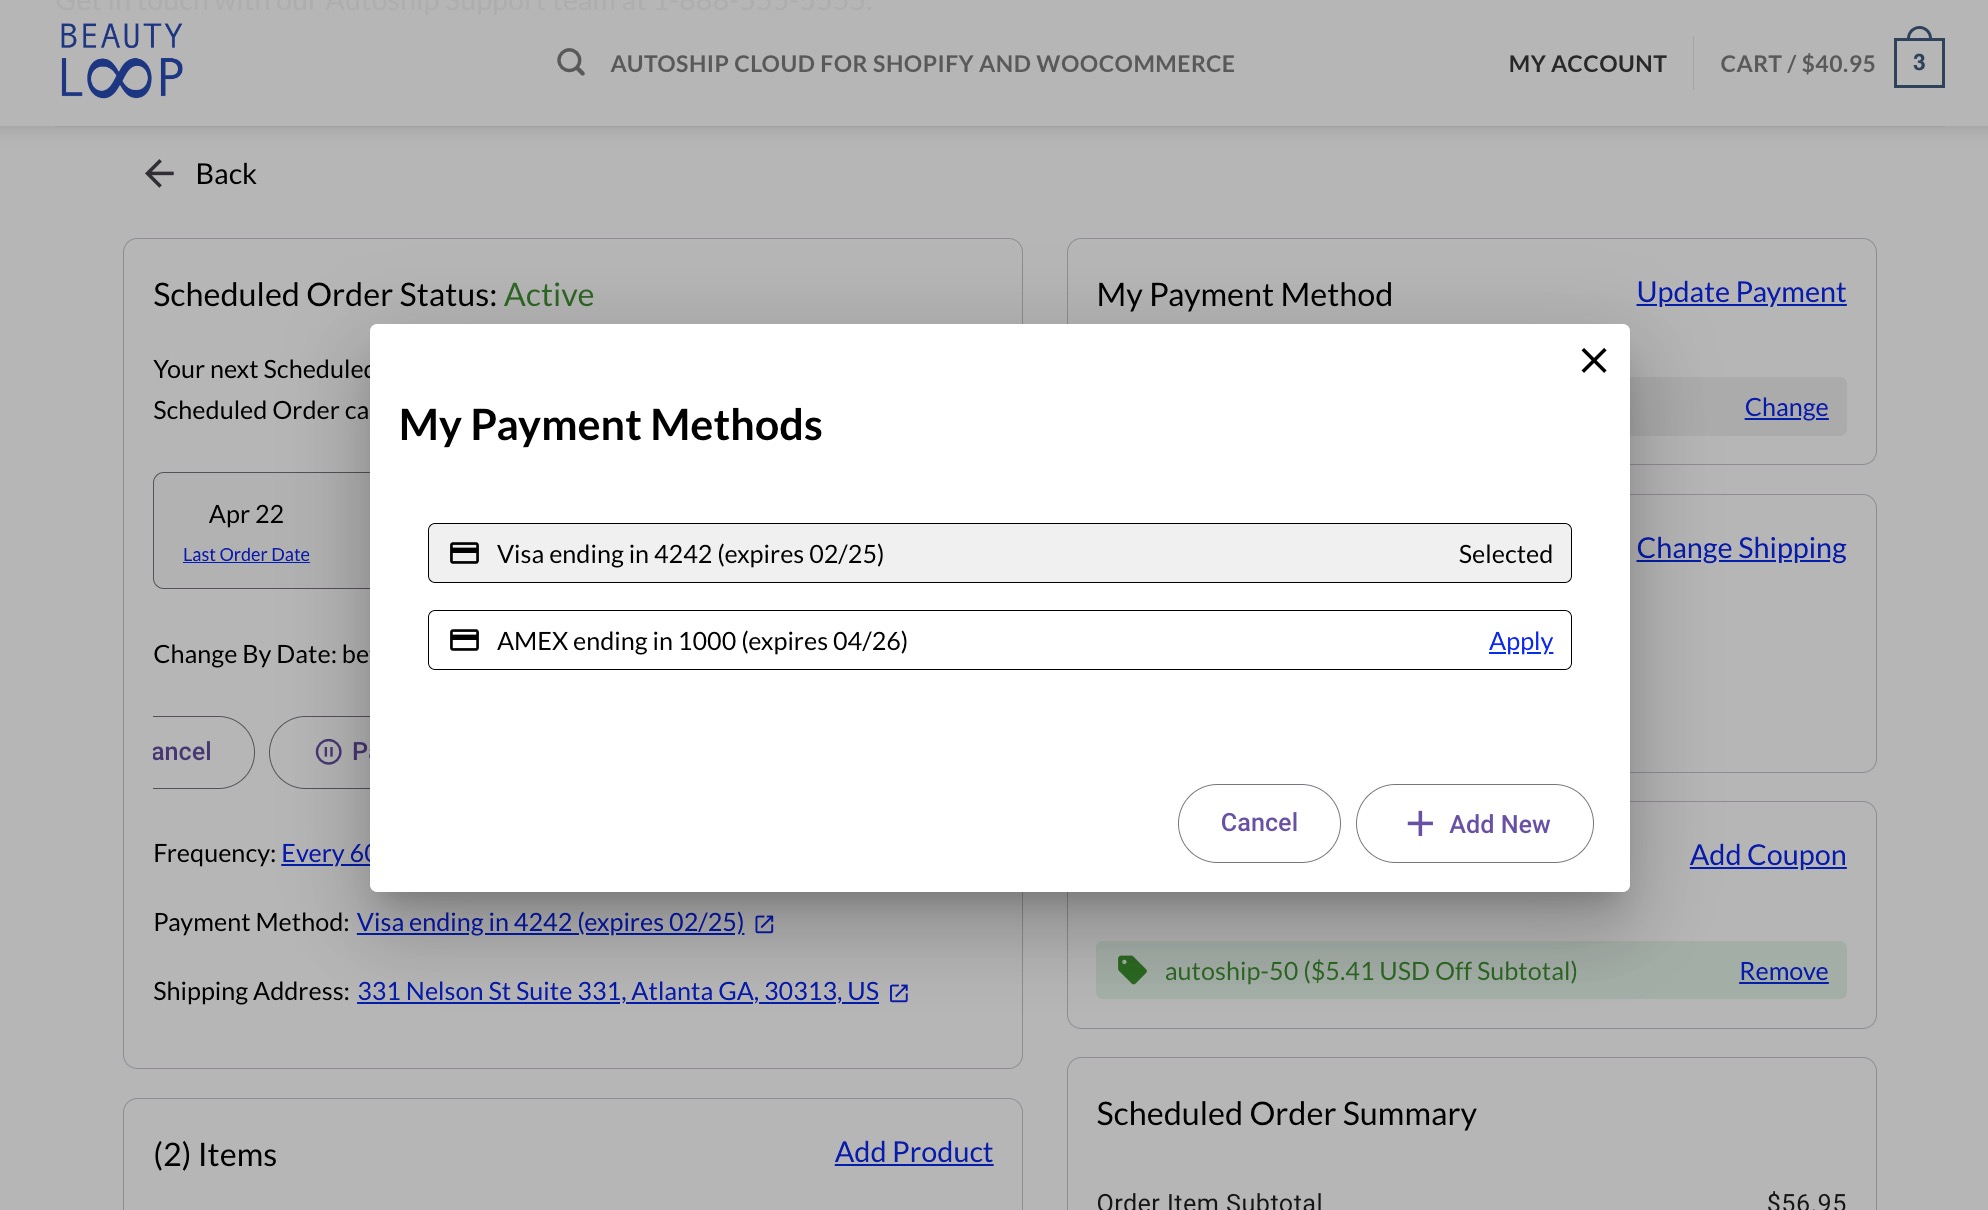 Pictured: The Update Payment Component is used by a subscriber to change their payment method.